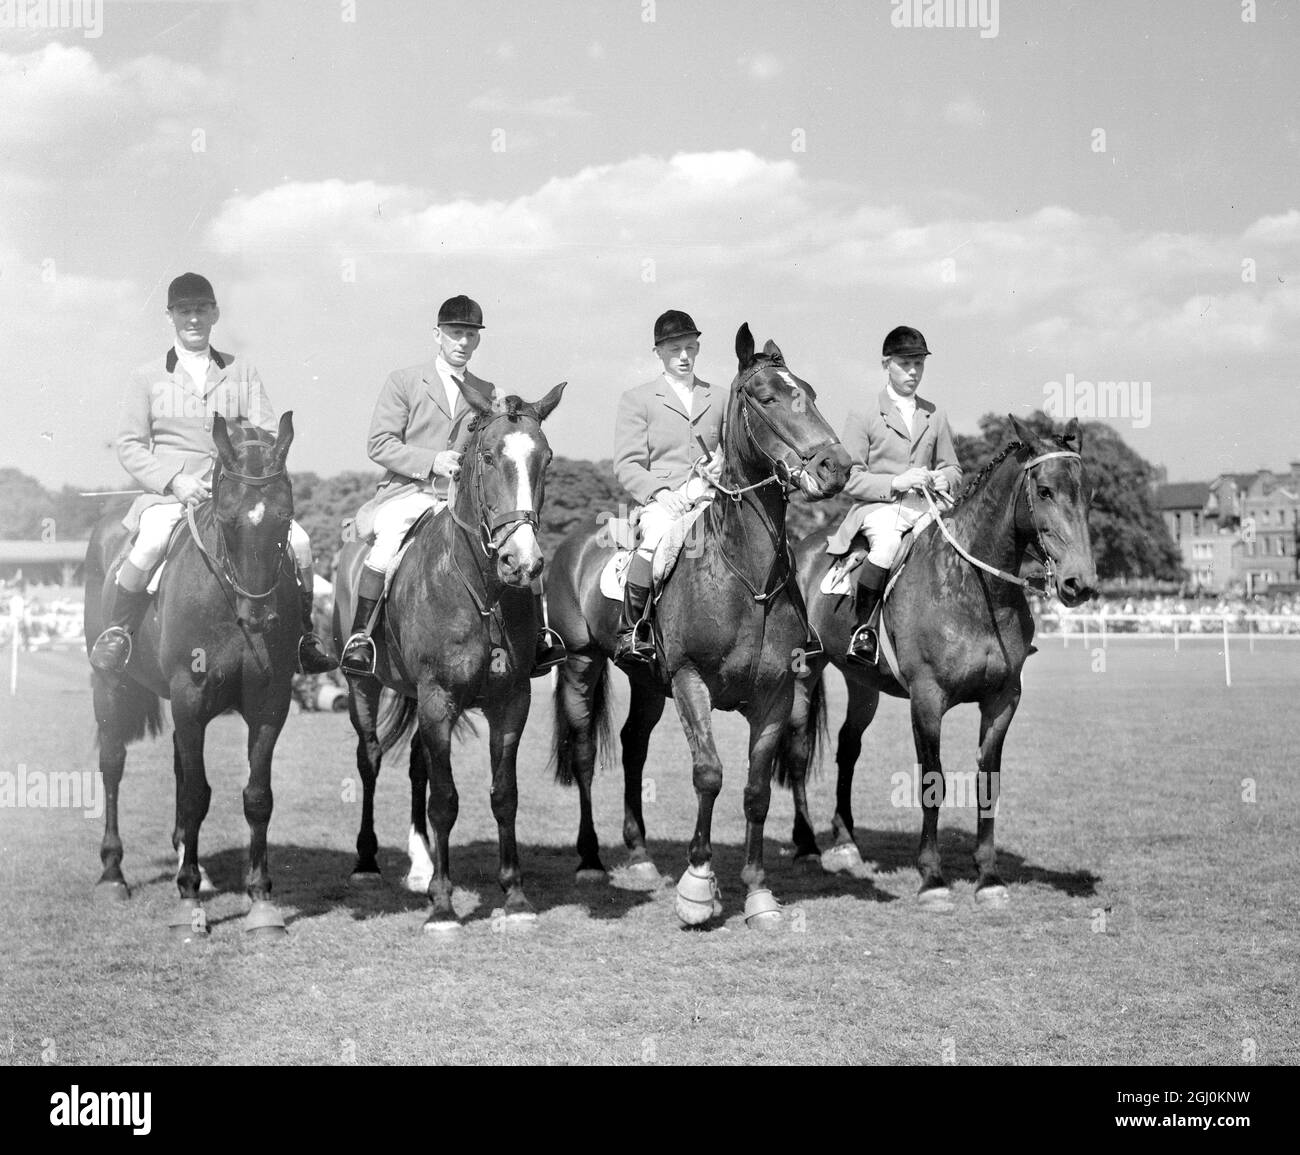 British Olympic Equestrian Team left to right Colonel Llewelyn on Monarch, W.H. White on Nizafella, A. Oliver on Atherlew and Peter Robinson on Craven A. Stock Photo